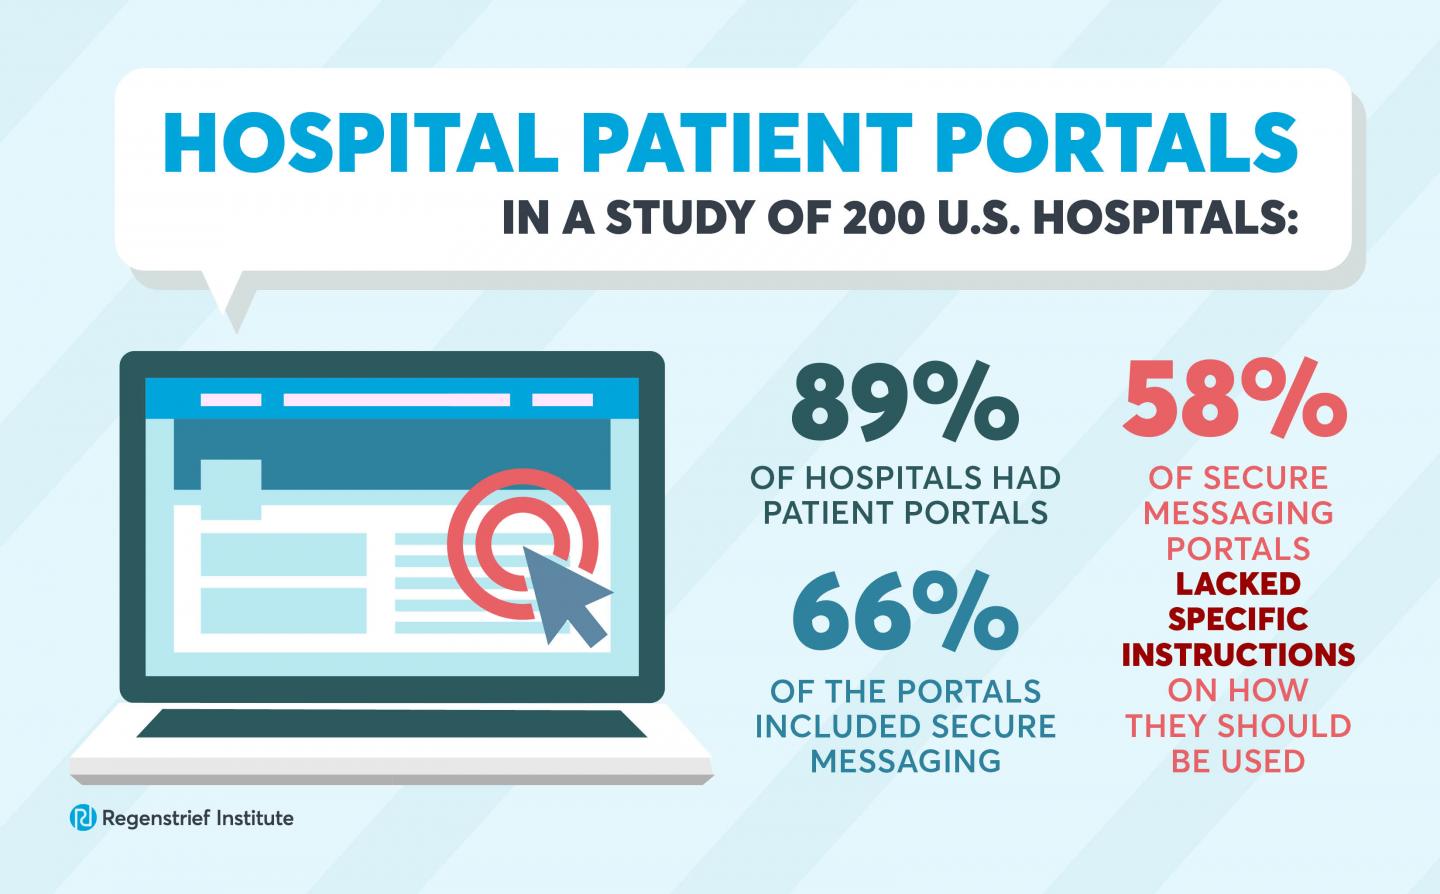 Study of Hospital Patient Portals Finds They Have Too Many Don'ts and not Enough Dos